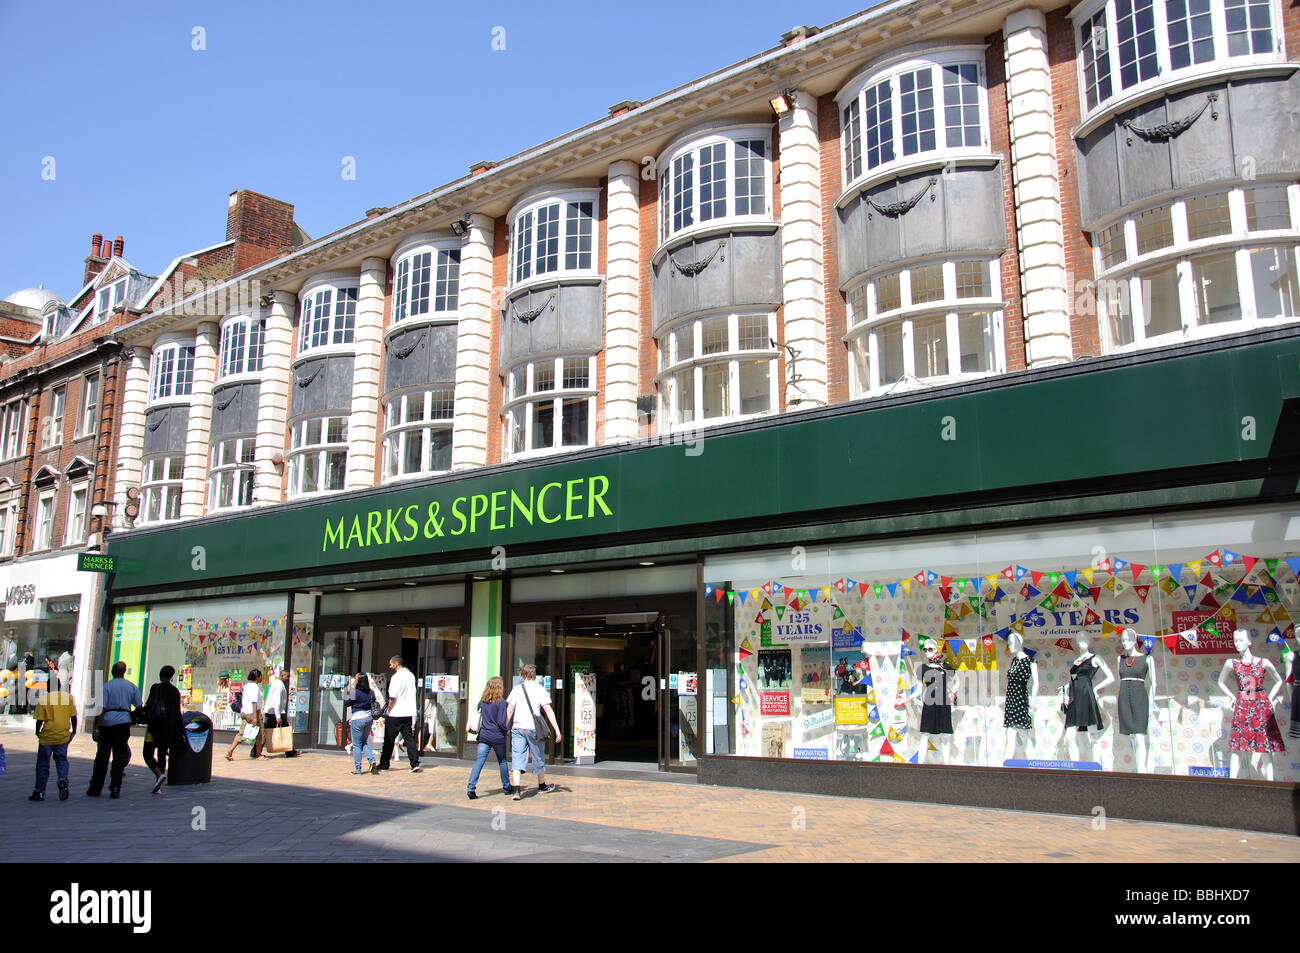 Marks & Spencer Store, High Street, Bromley, The London Borough of Bromley, Greater London, England, United Kingdom Stock Photo